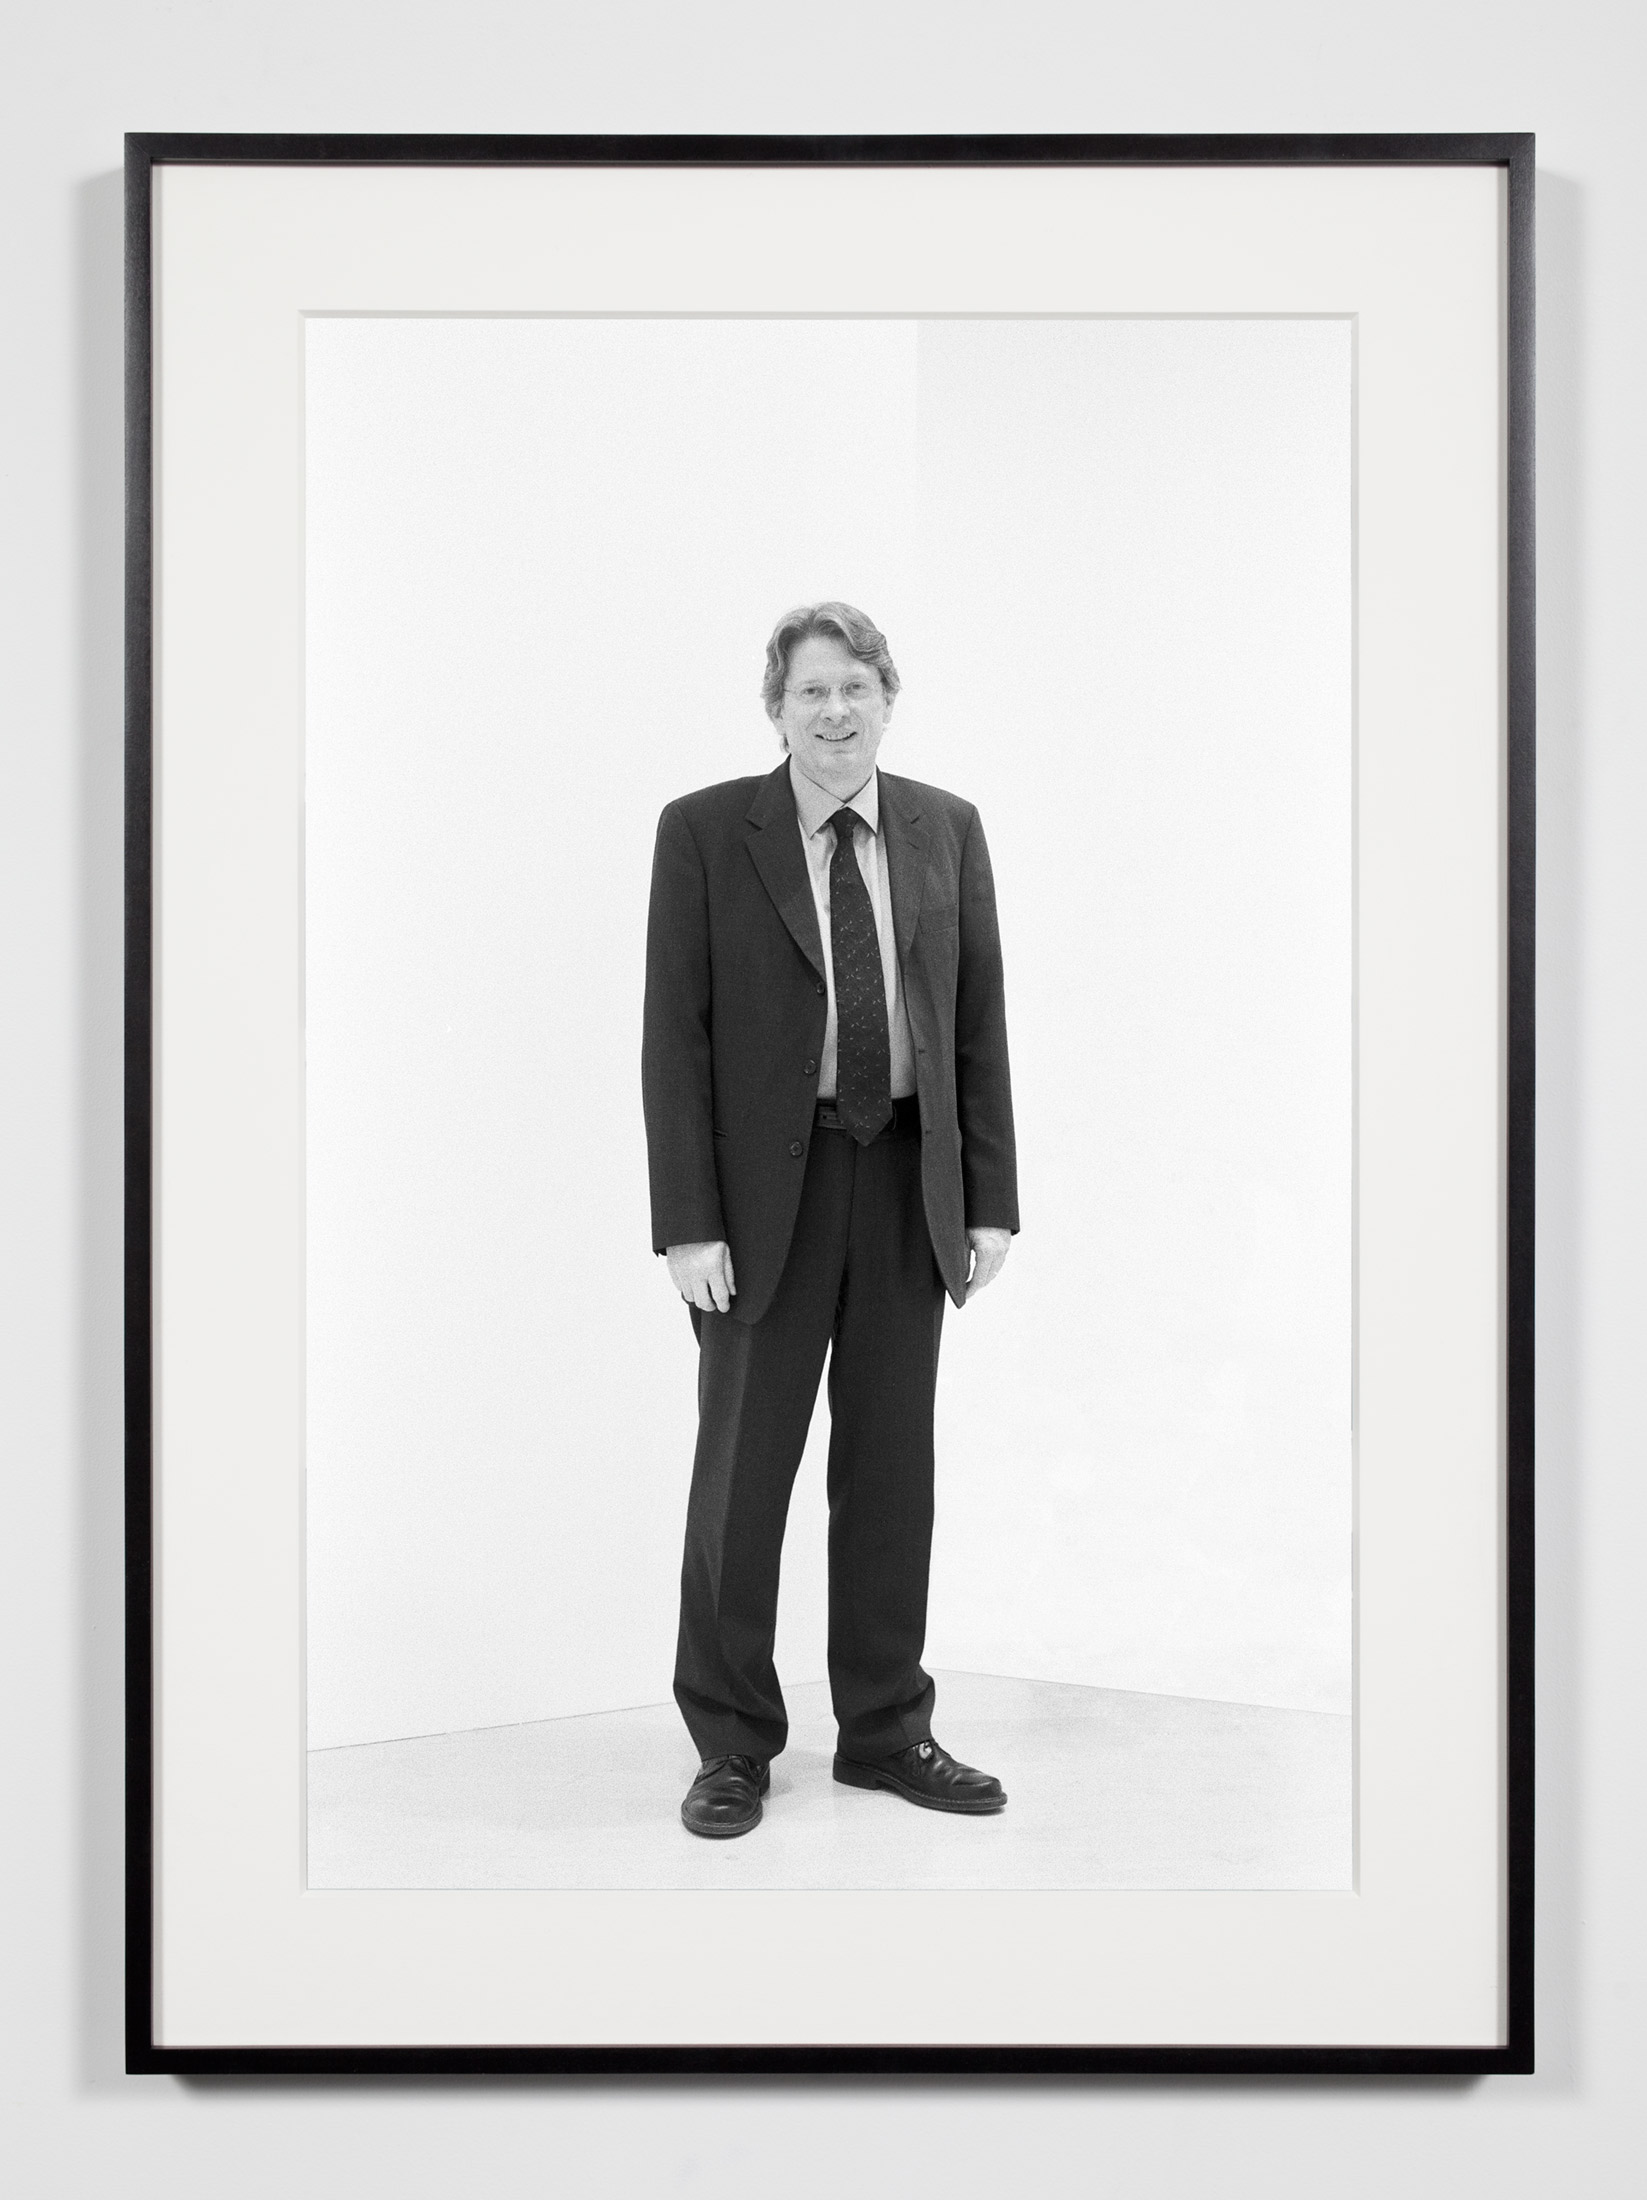   Museum Chief Curator, Washington, District of Columbia, April 29, 2009    2011   Epson Ultrachrome K3 archival ink jet print on Hahnemühle Photo Rag paper  36 3/8 x 26 3/8 inches   Industrial Portraits, 2008–     